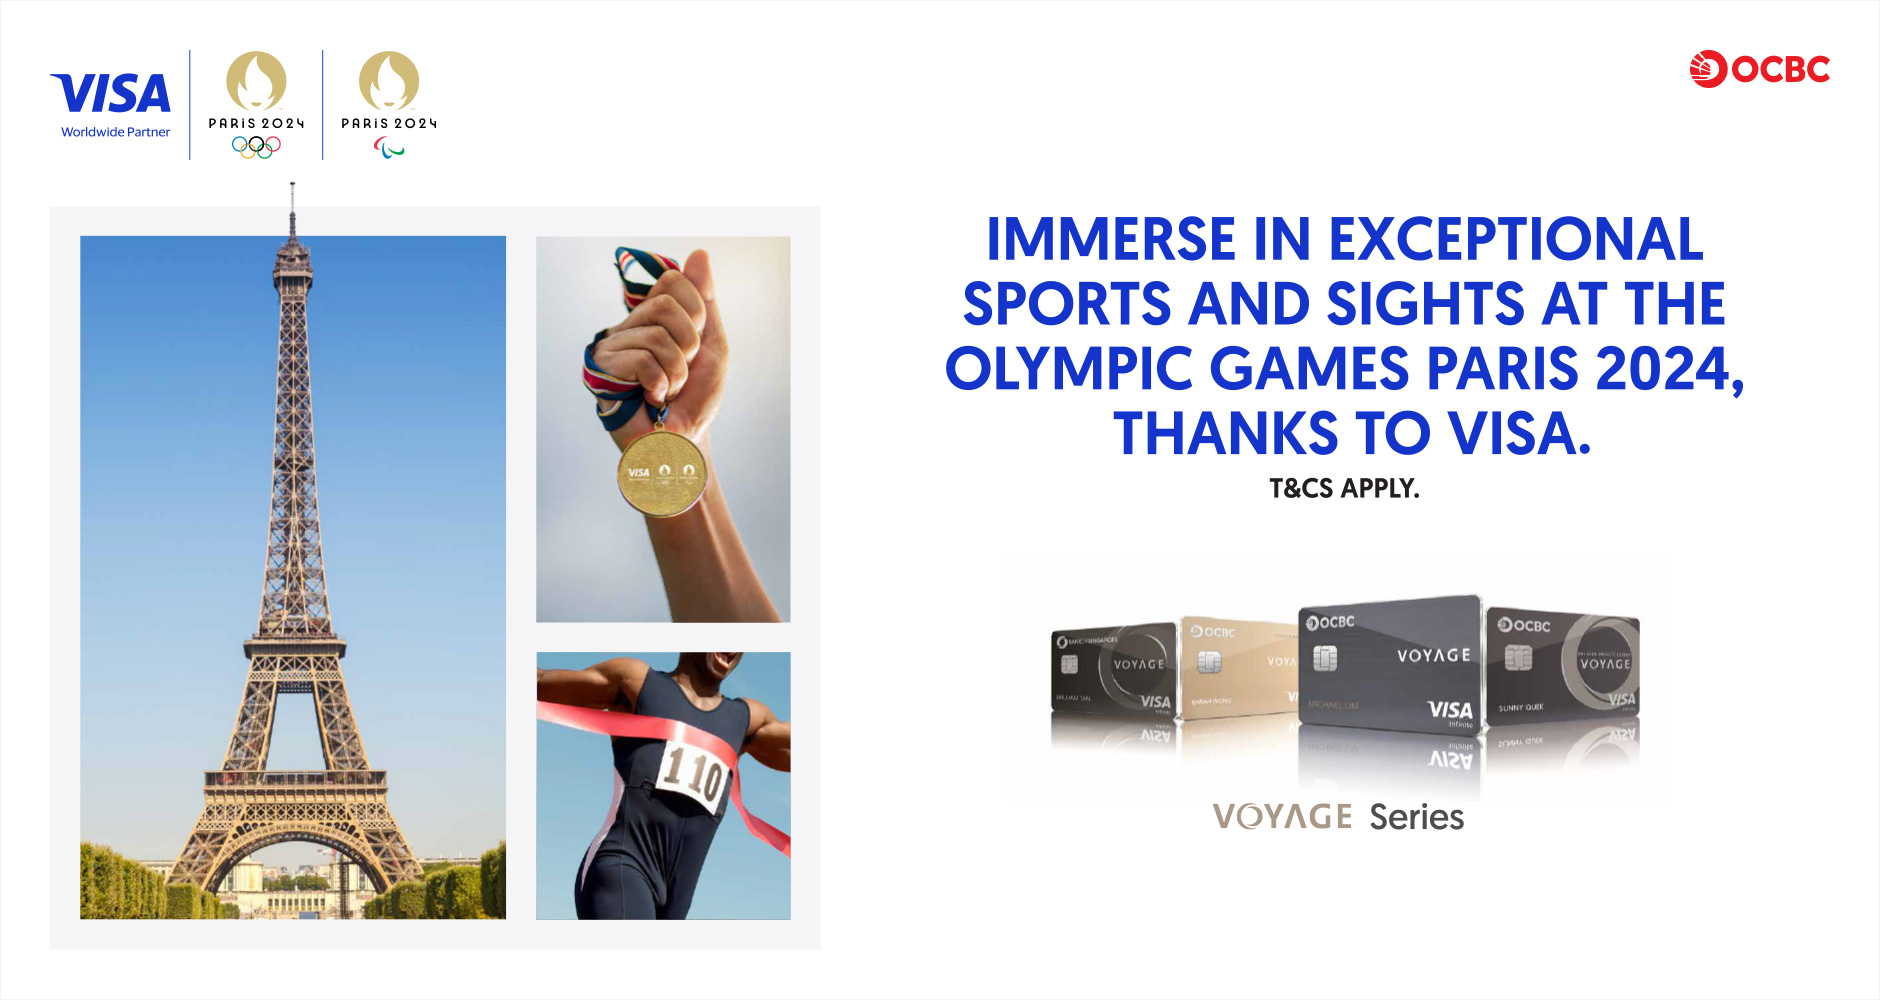 Strike gold for an exclusive Olympic Games Paris 2024 experience, thanks to Visa.